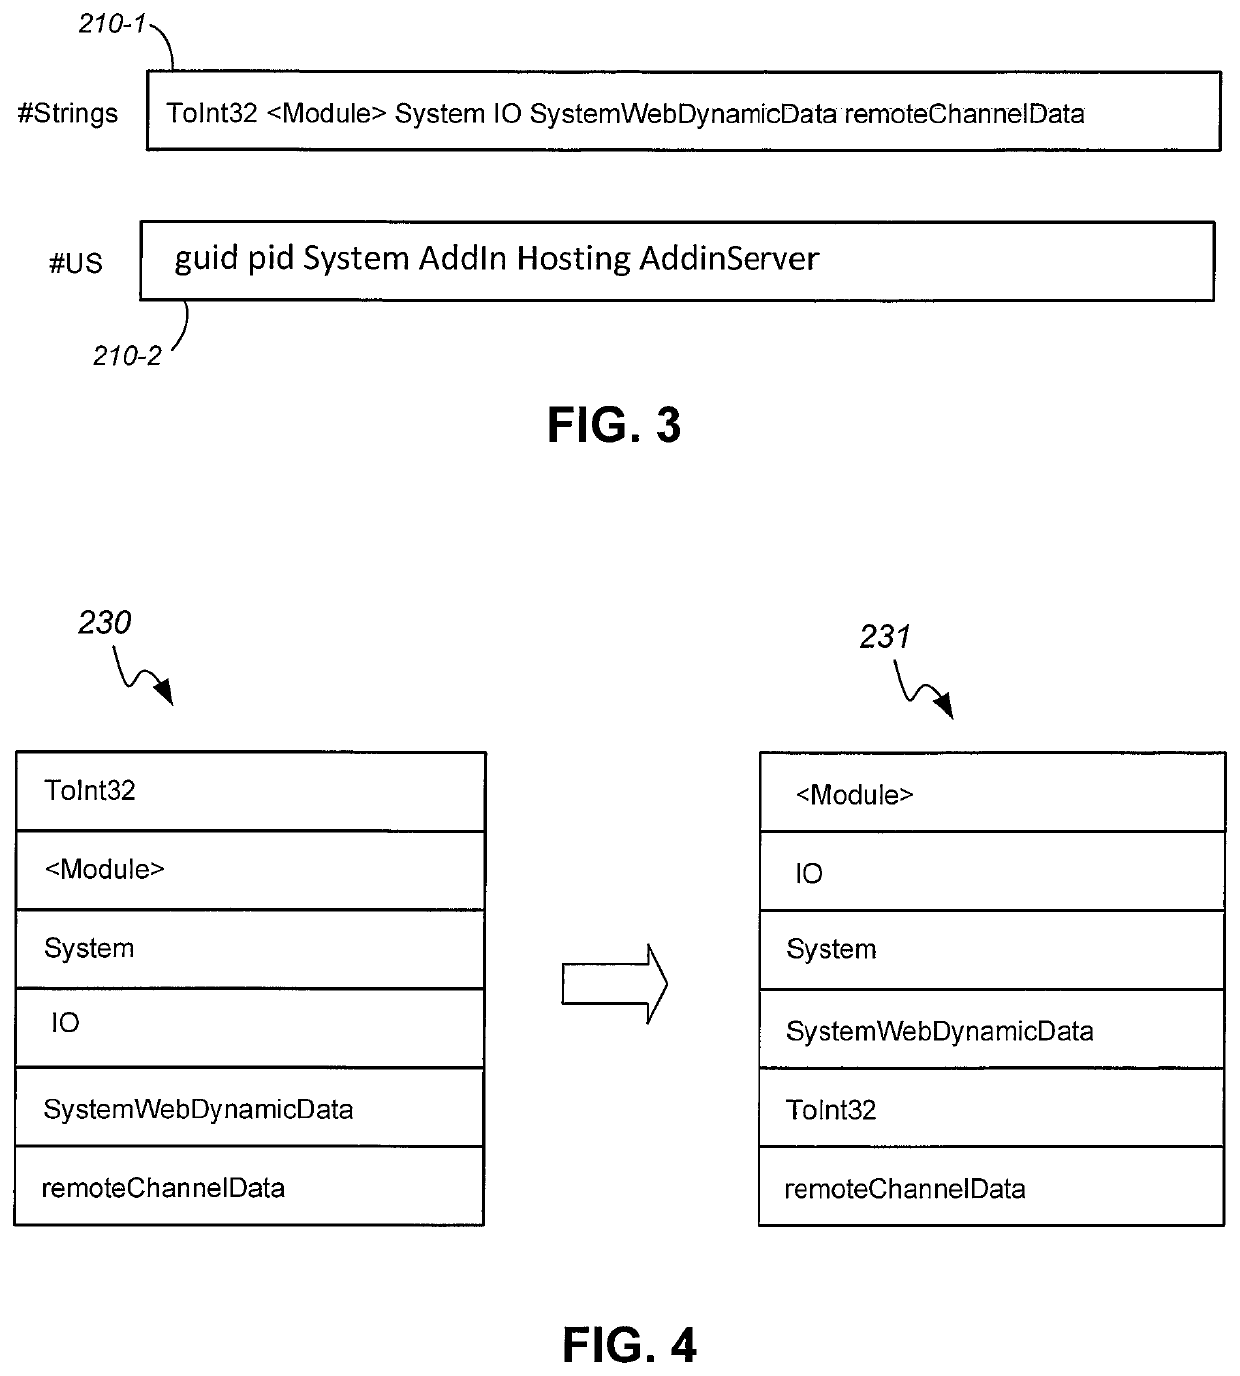 Generation of file digests for detecting malicious executable files